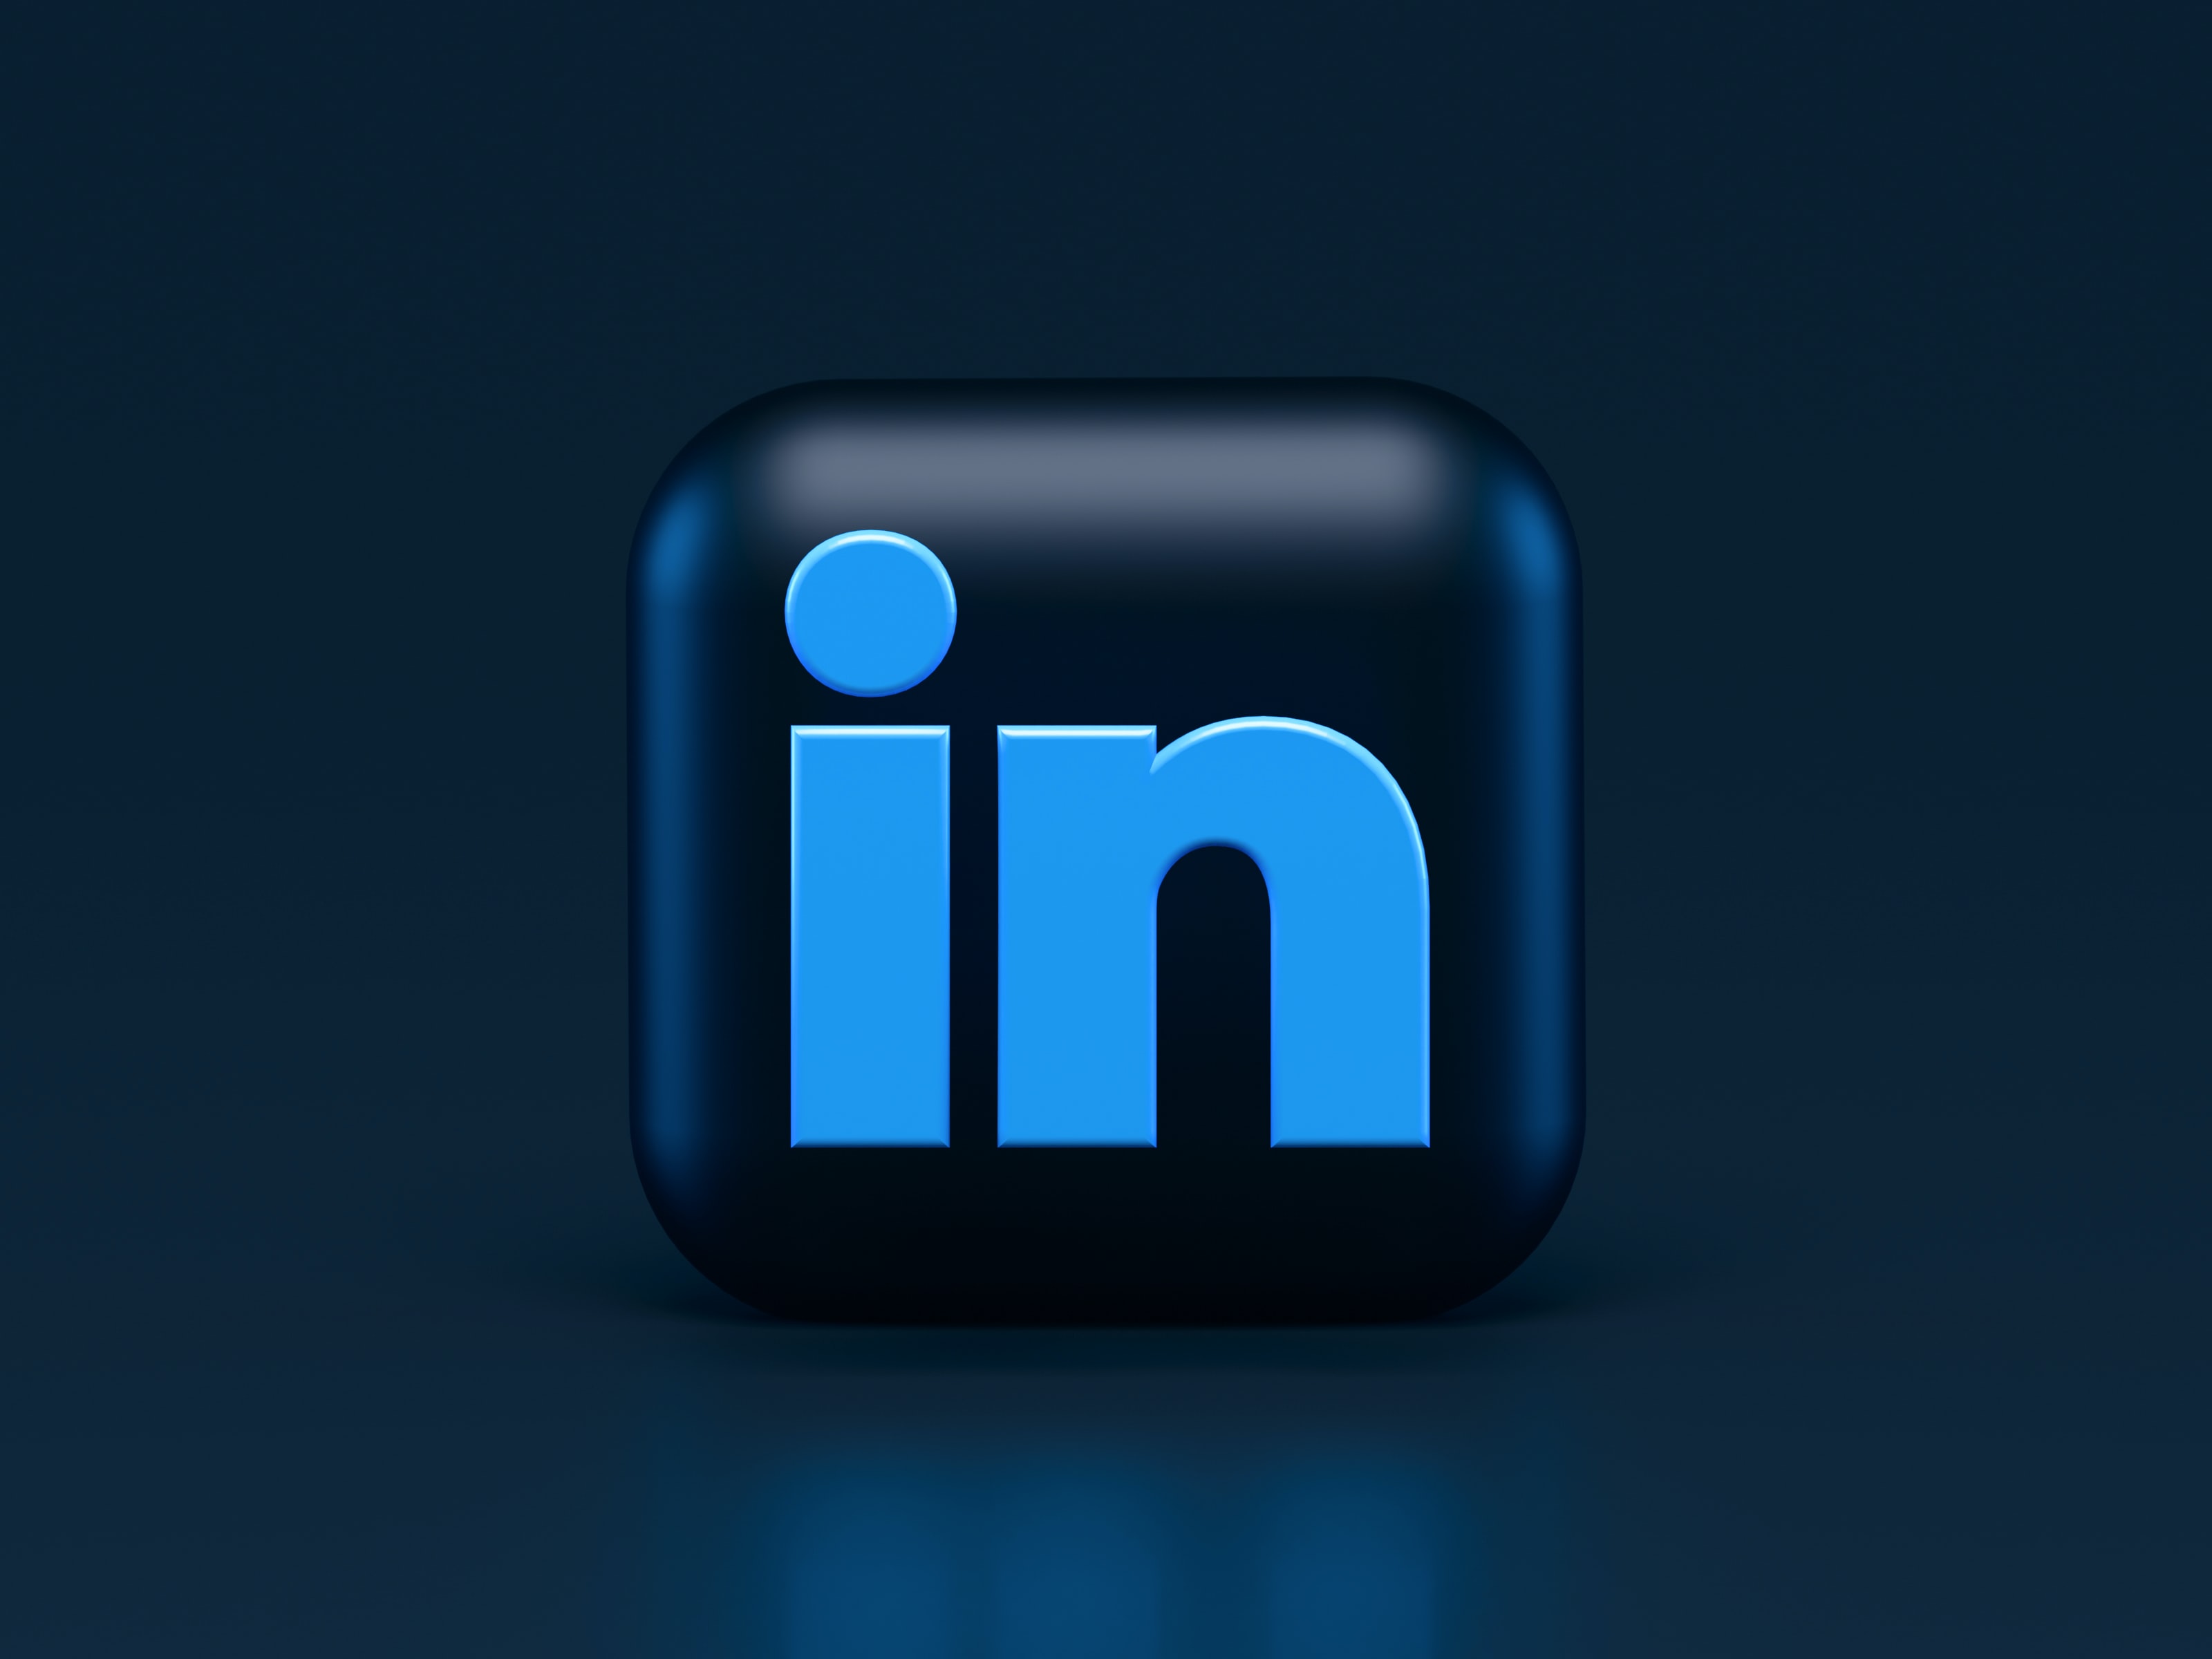 Four Reasons LinkedIn is Challenging for the Cannabis Industry